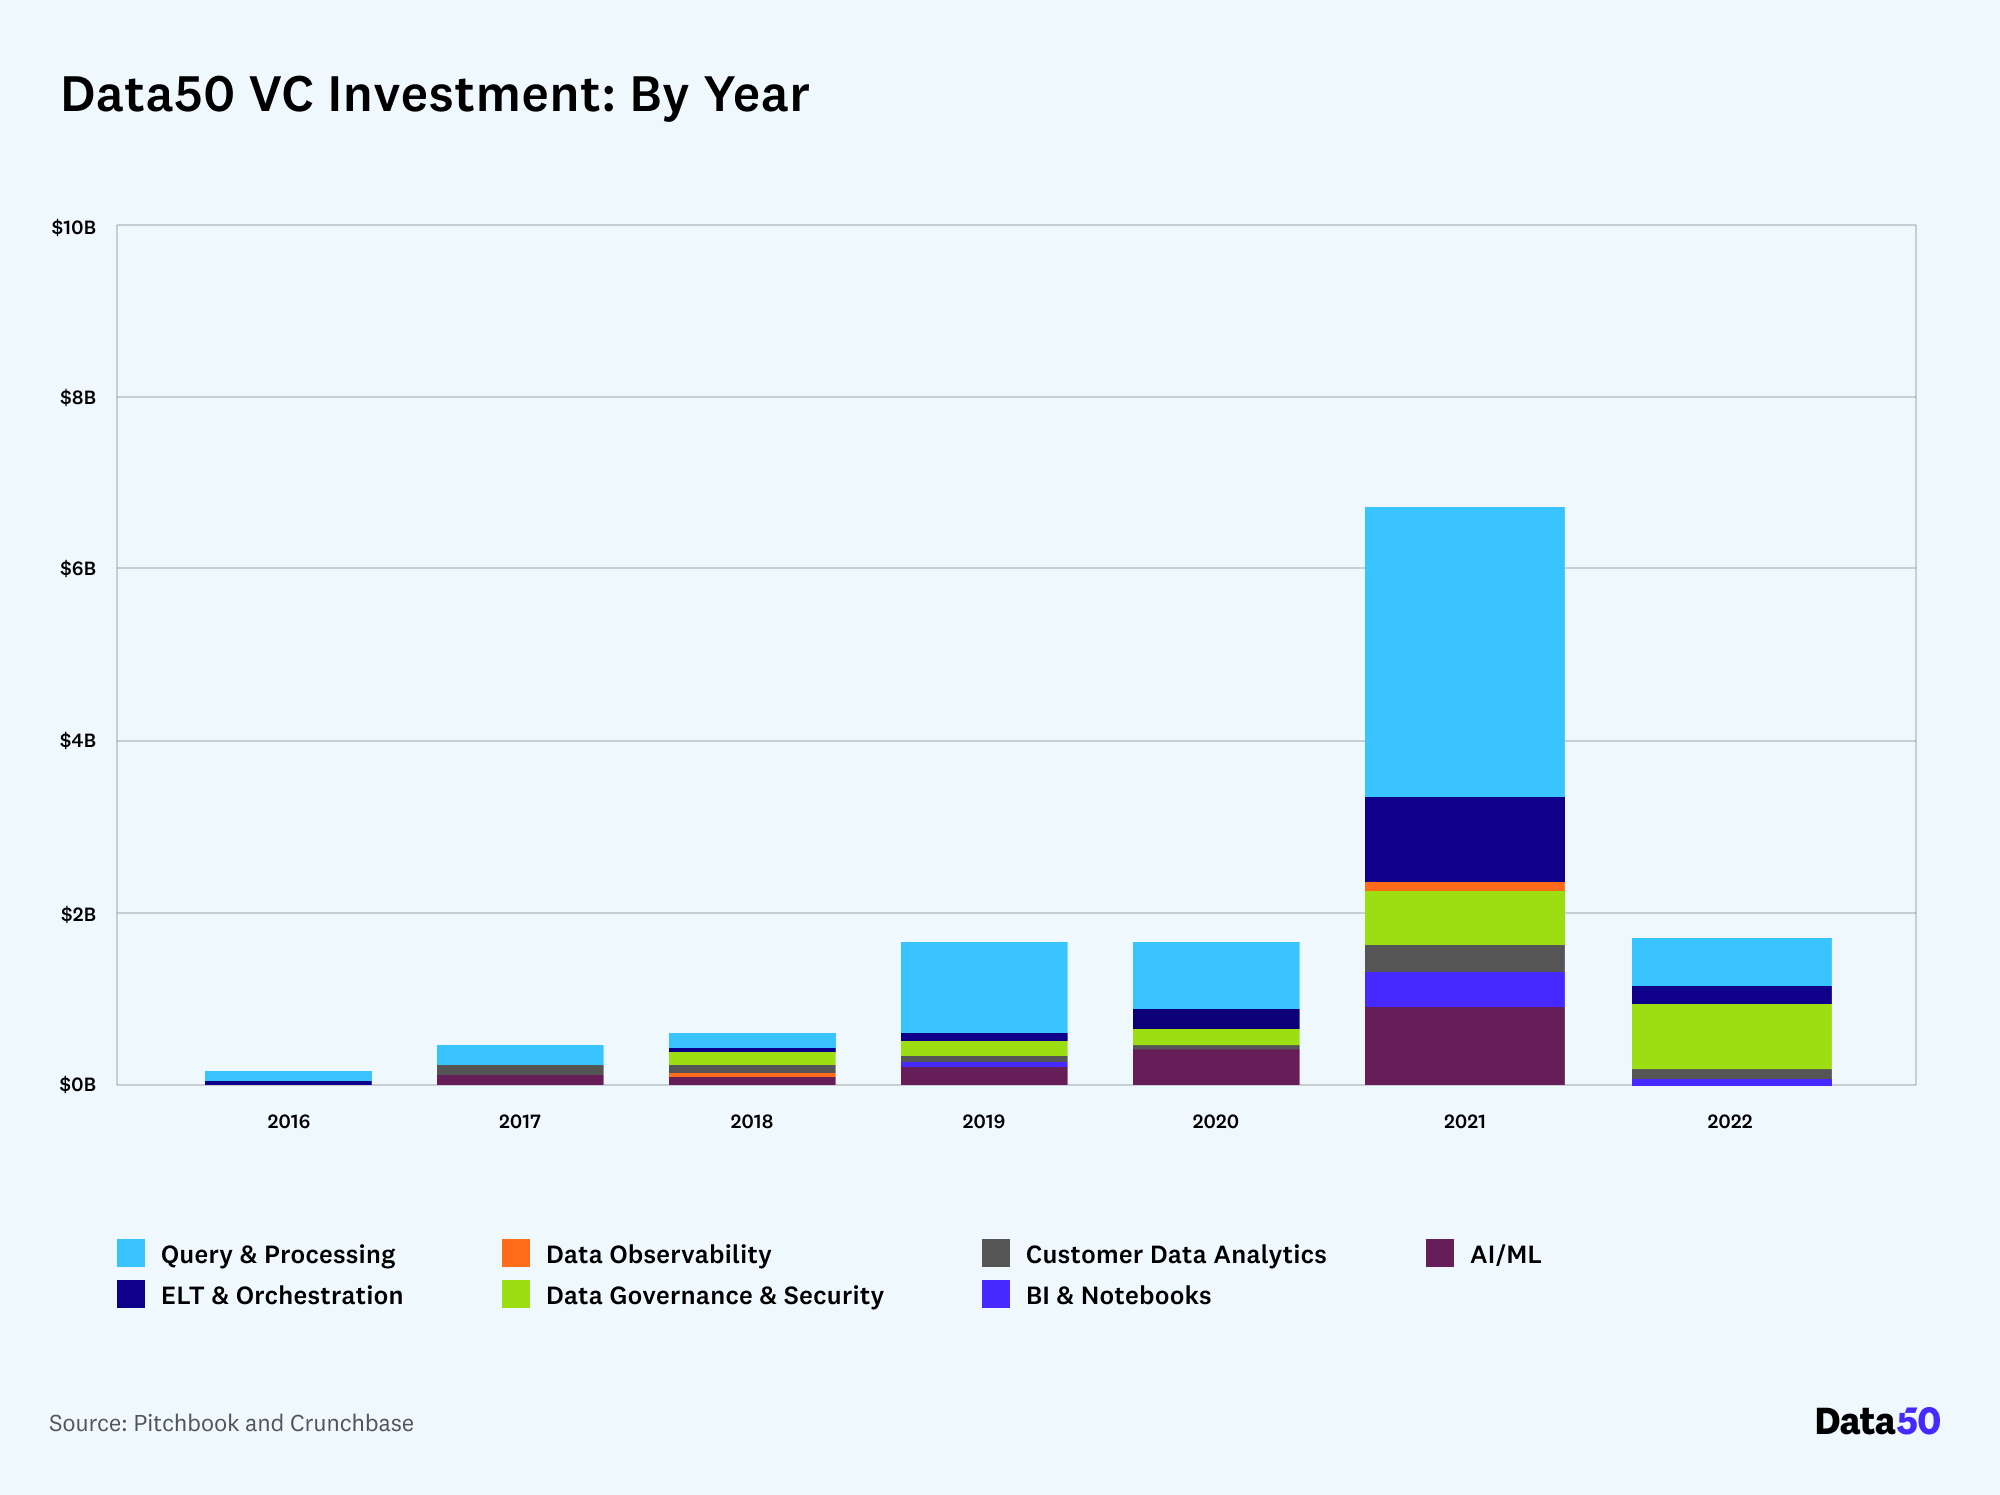 VC Investments by Year